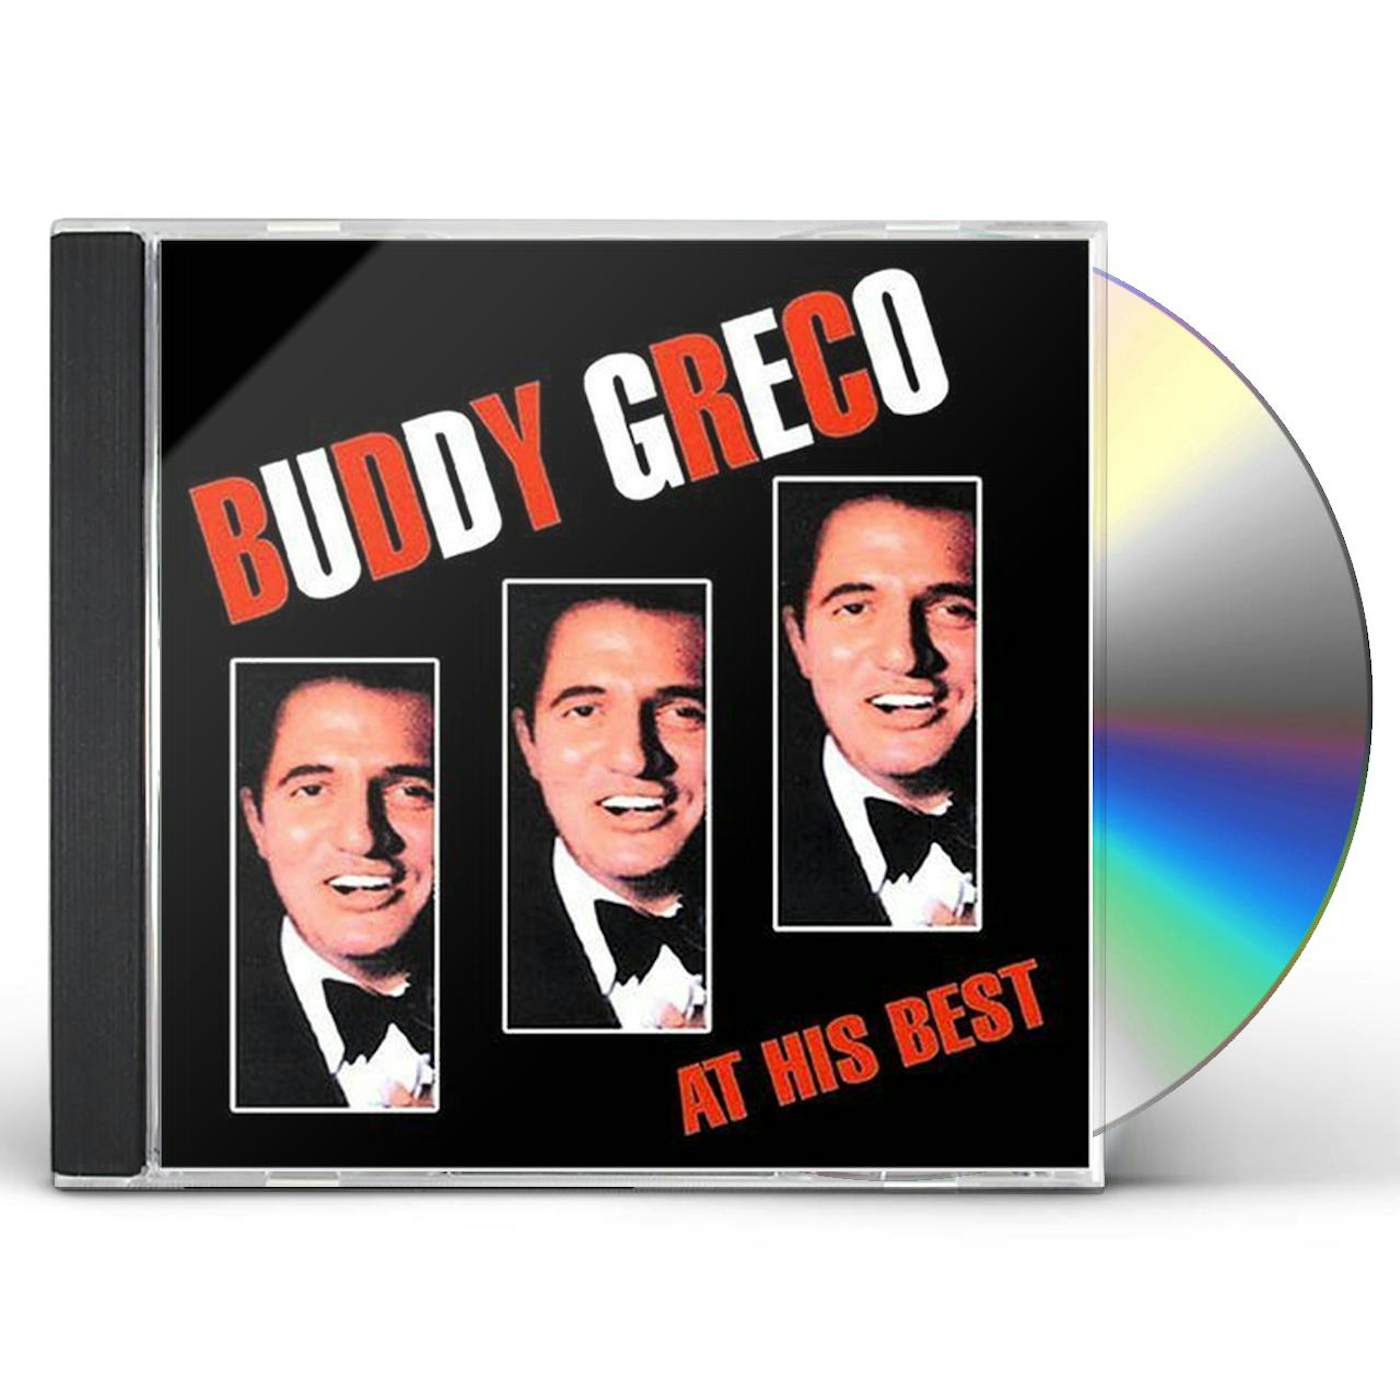 Buddy Greco AT HIS BEST CD